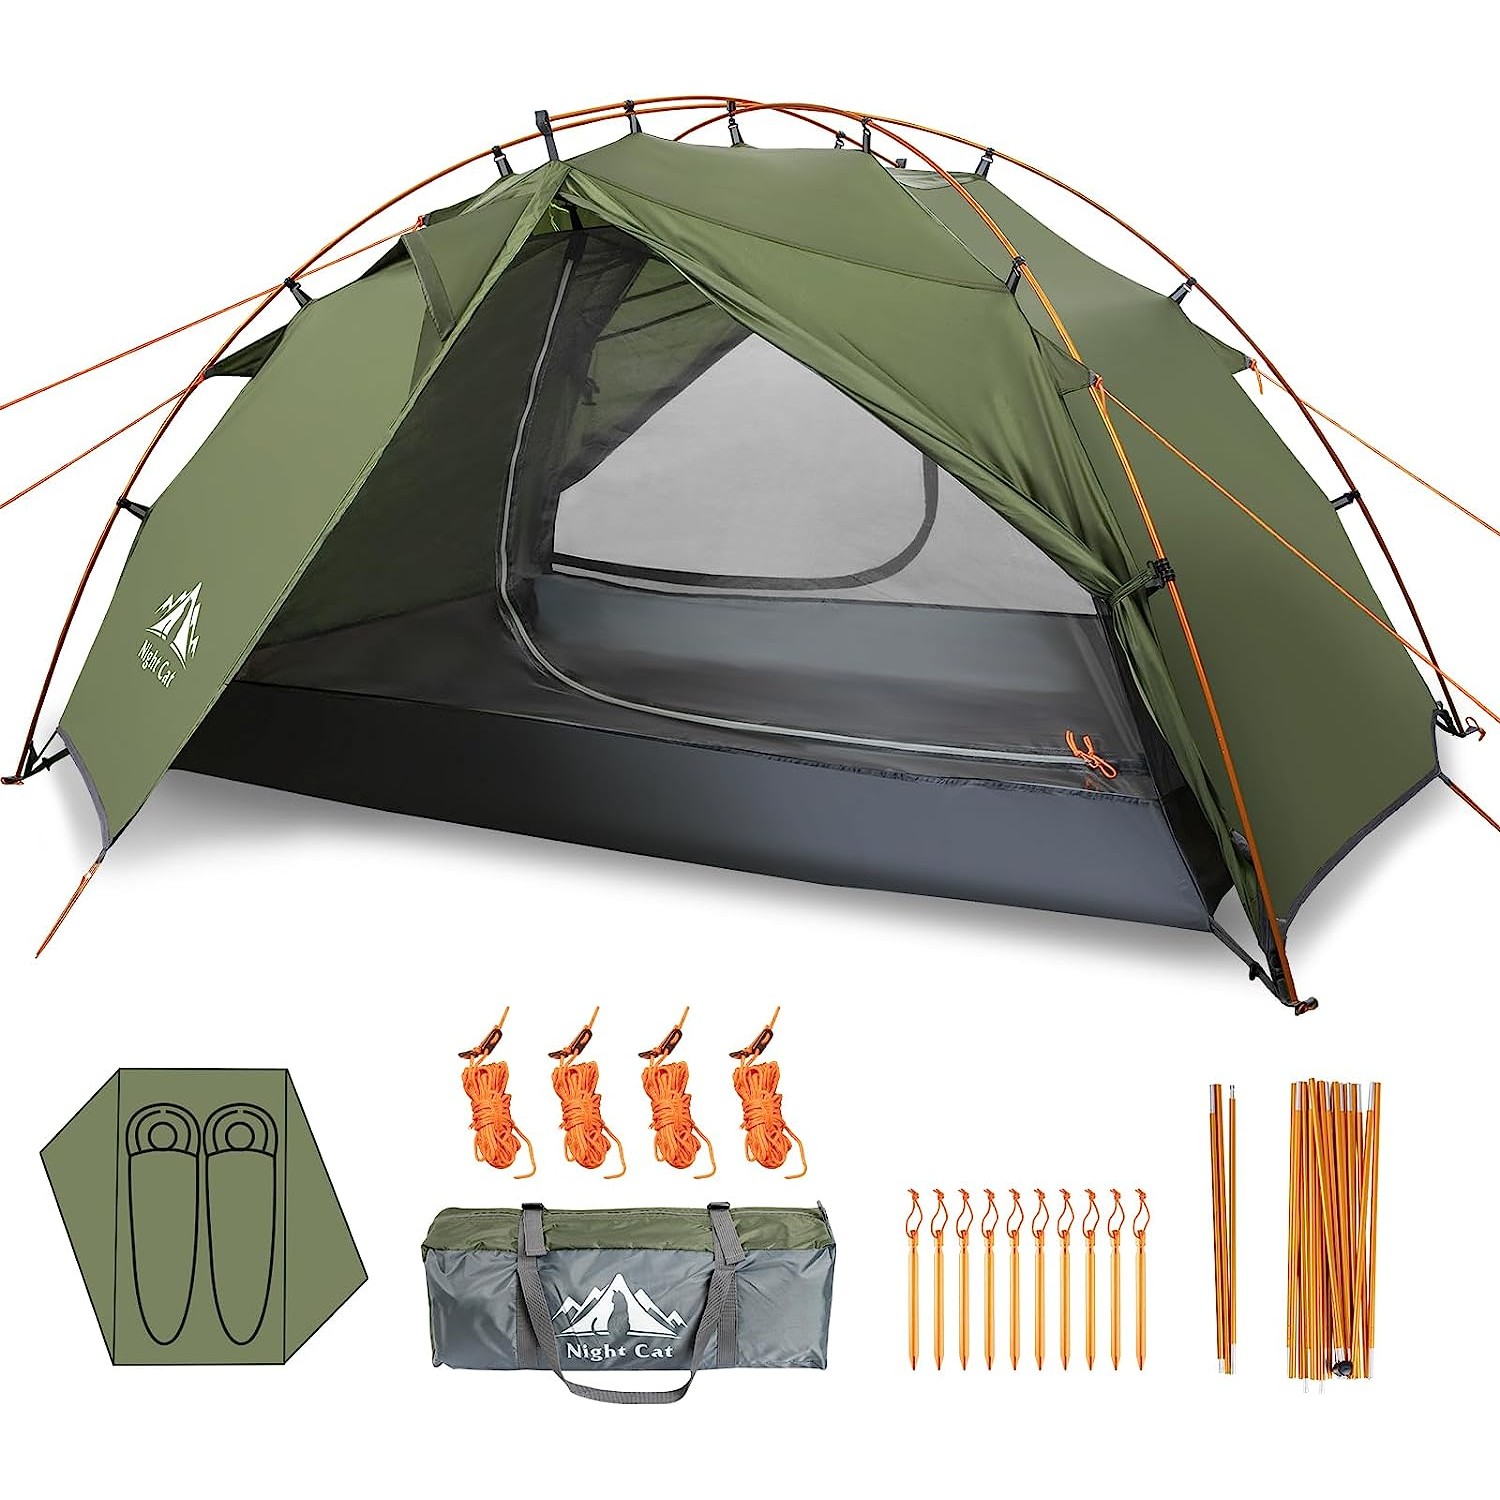 Backpacking Tent 1-Person W/ 2 Vents Outdoor Camping Travel Lightweight  Green US